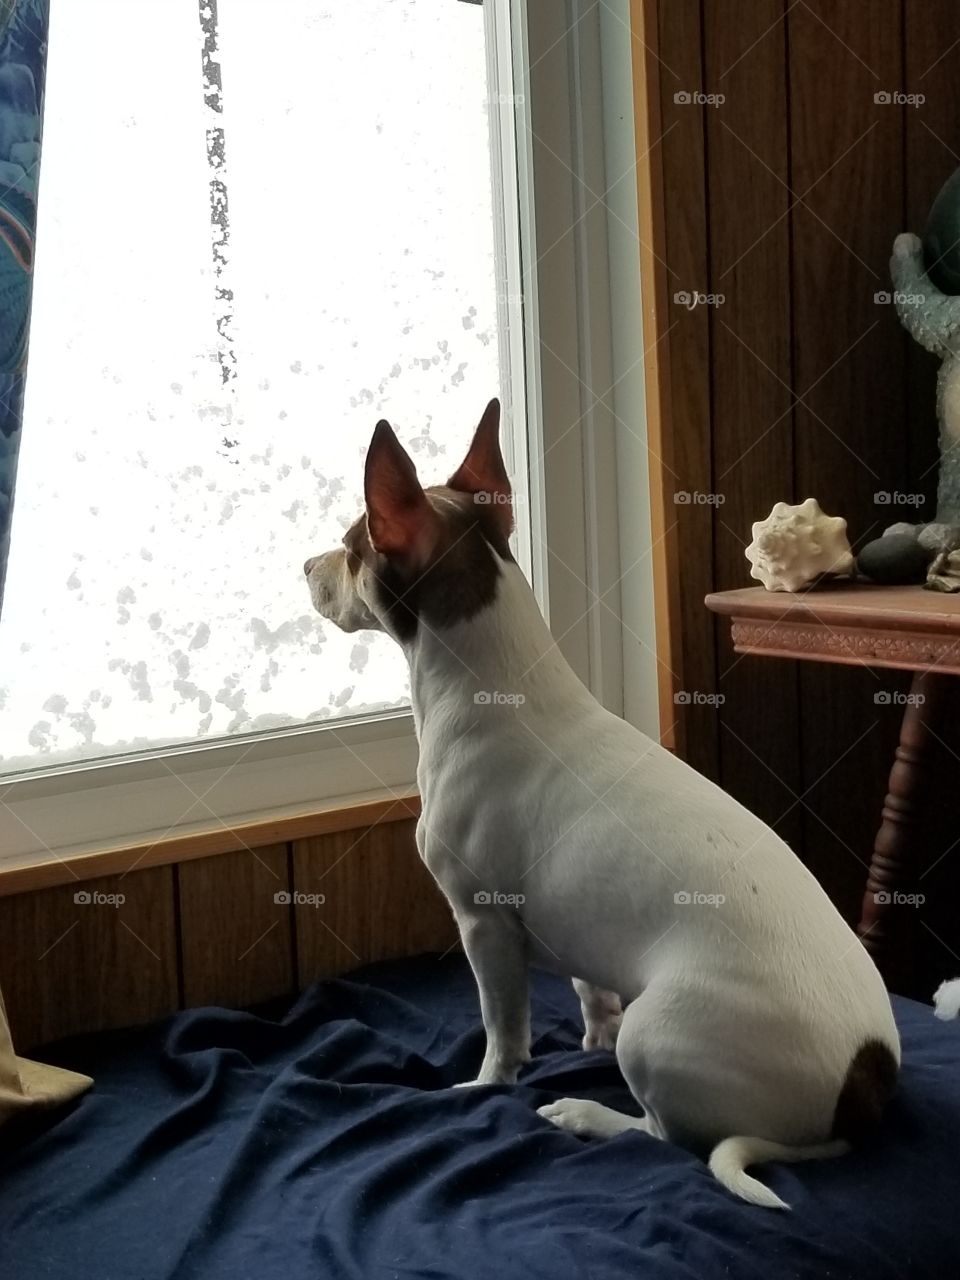 watching the snow